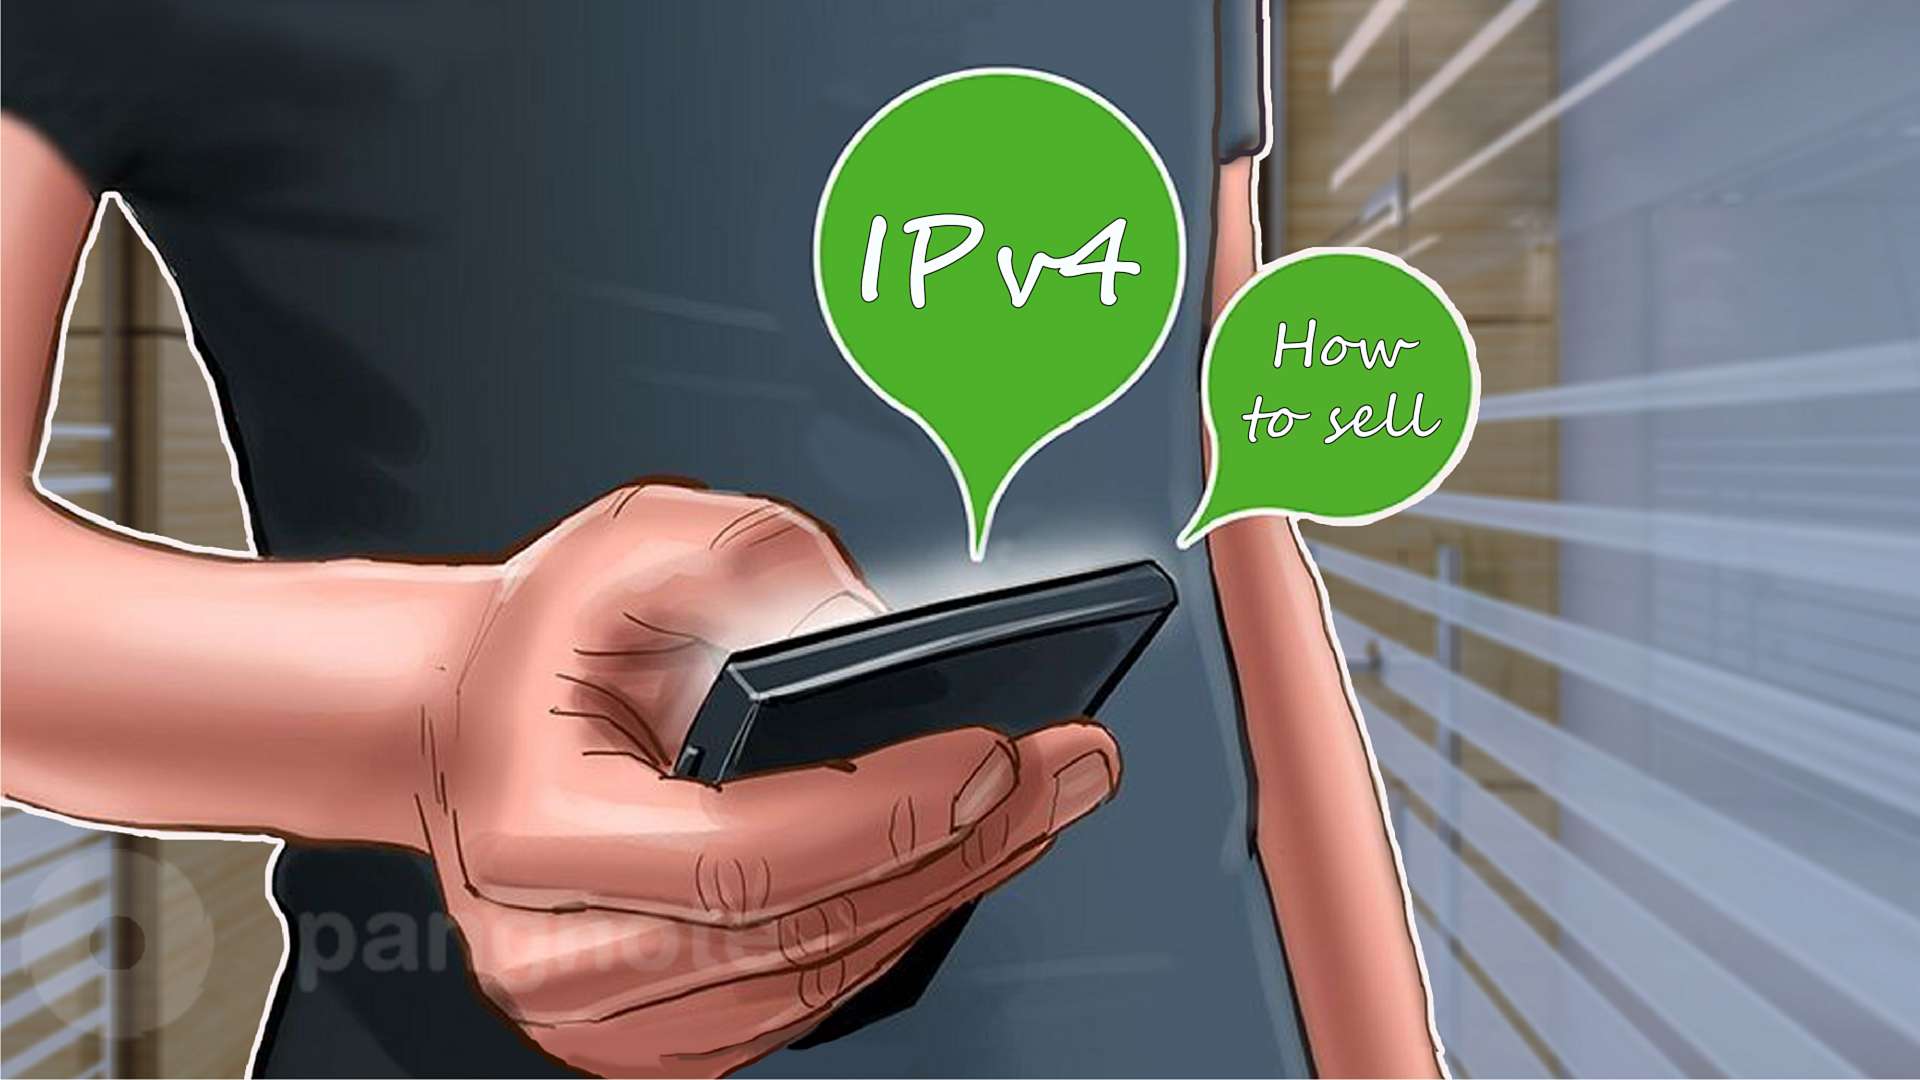 Decided to IPv4 sell? Ask us how!